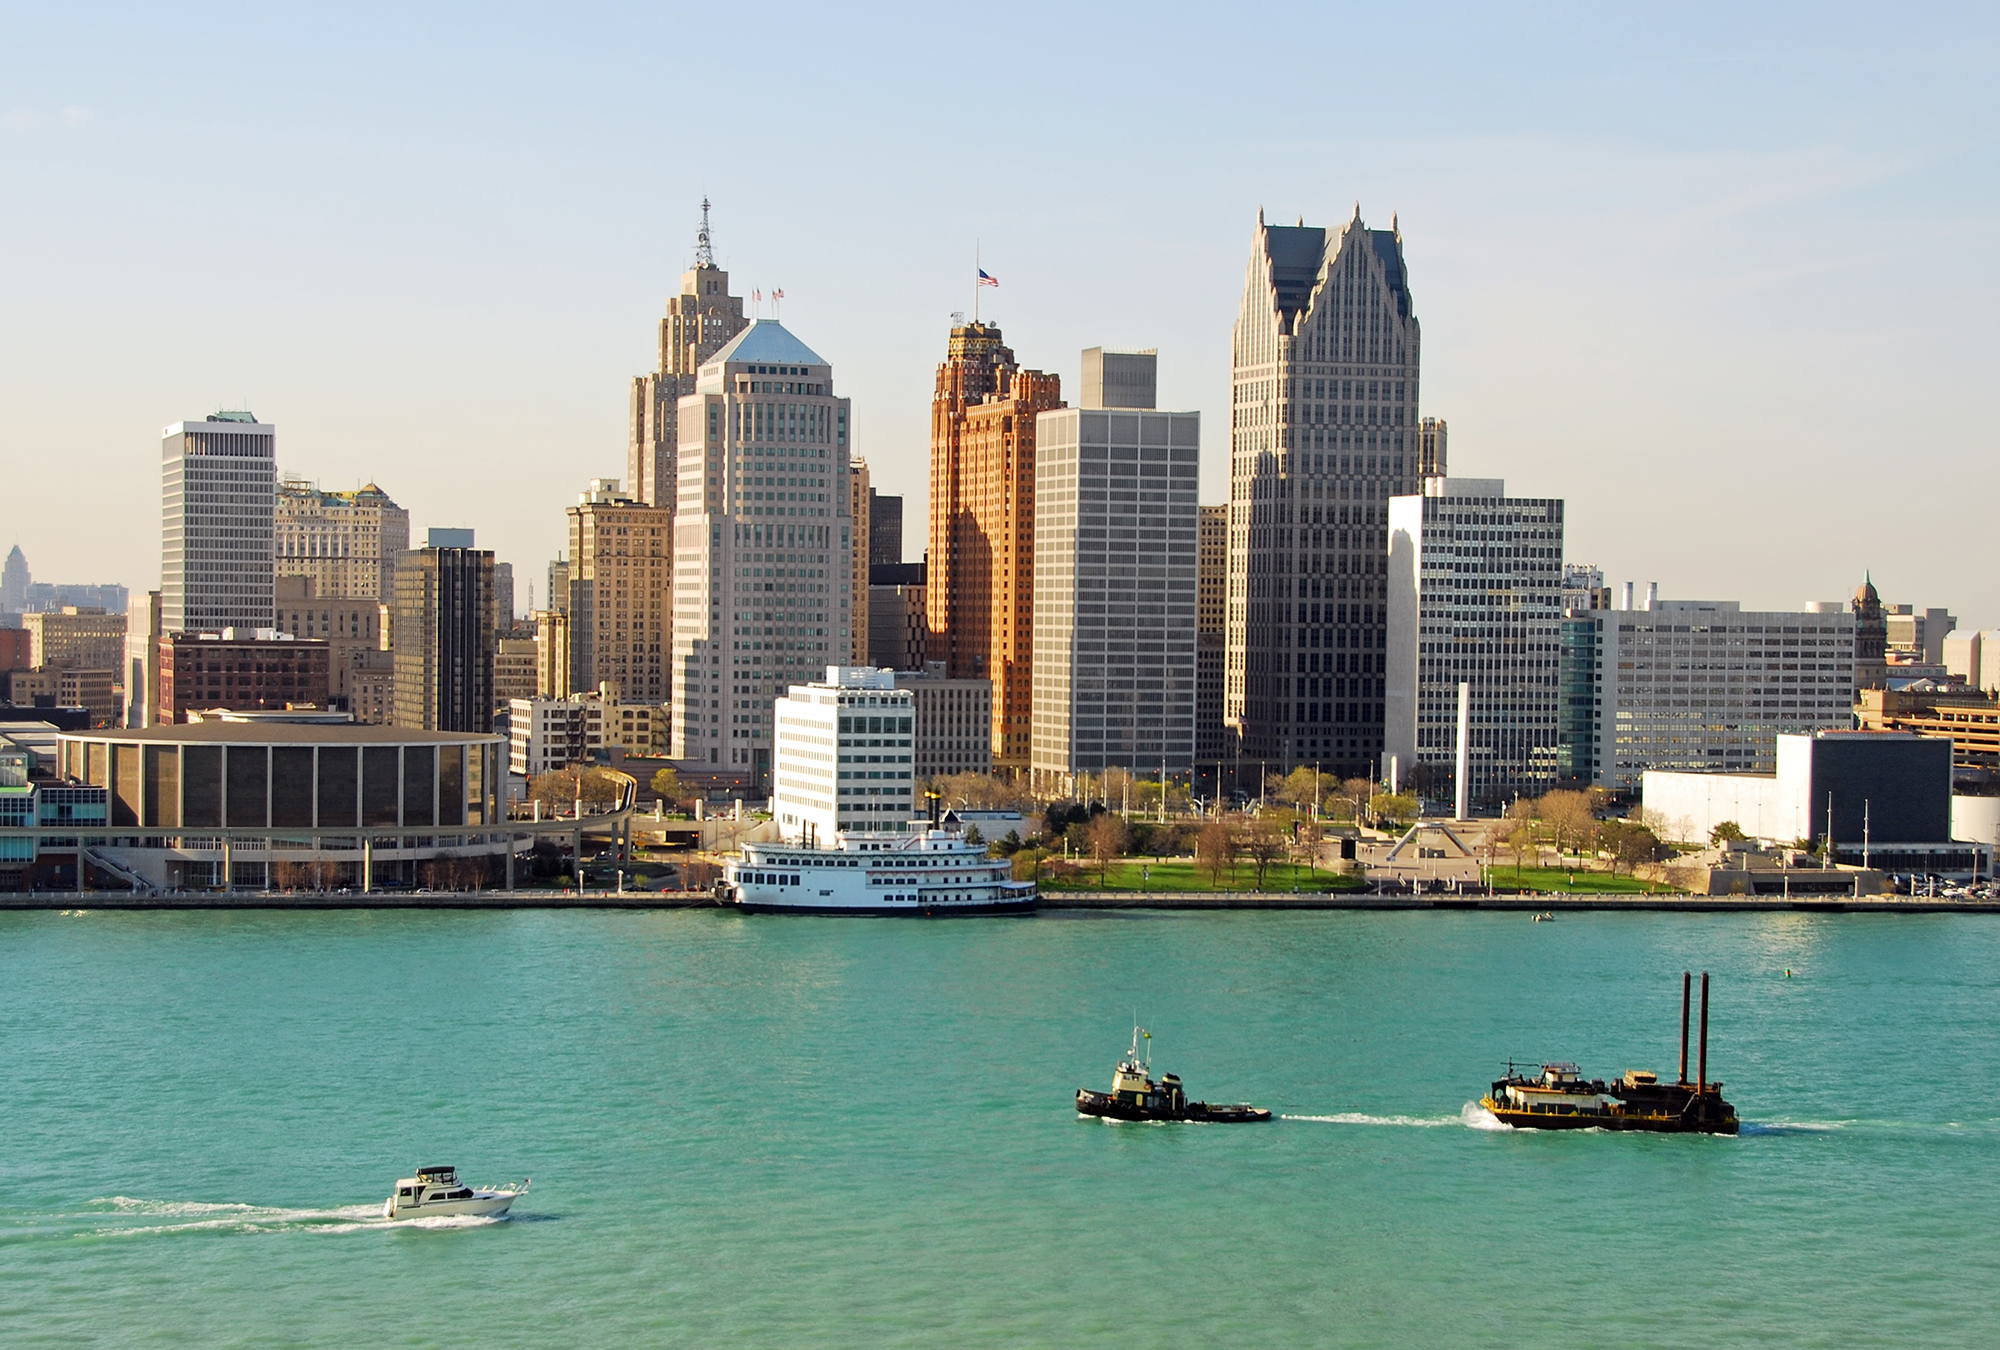 Detroit is a major city in southeastern Michigan.